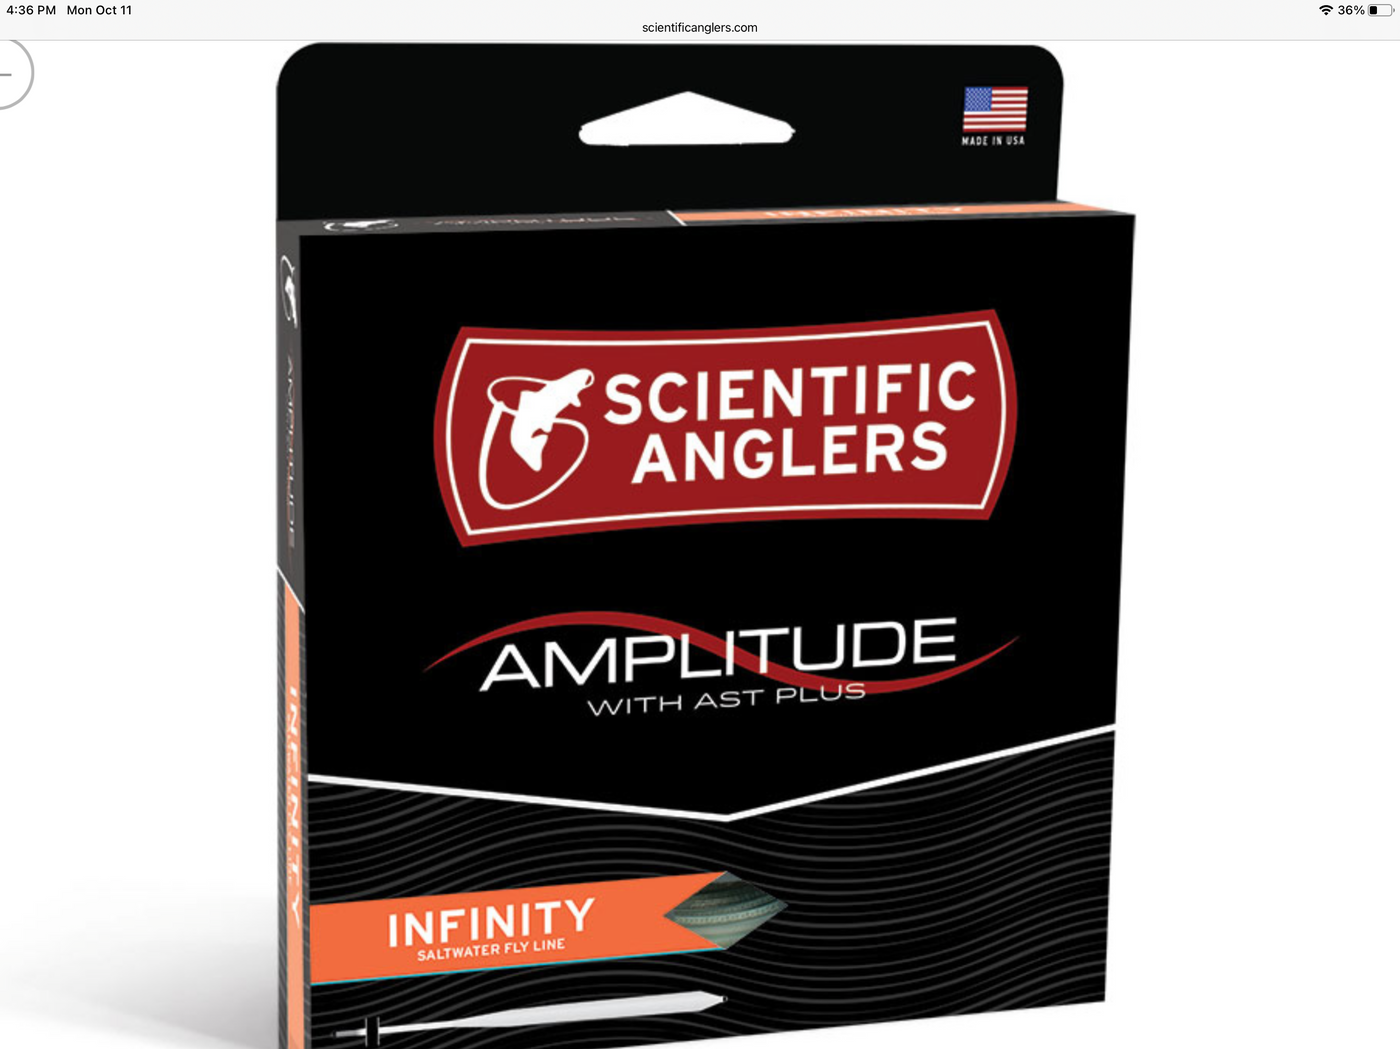 Scientific Anglers Infinity Saltwater Fly Line